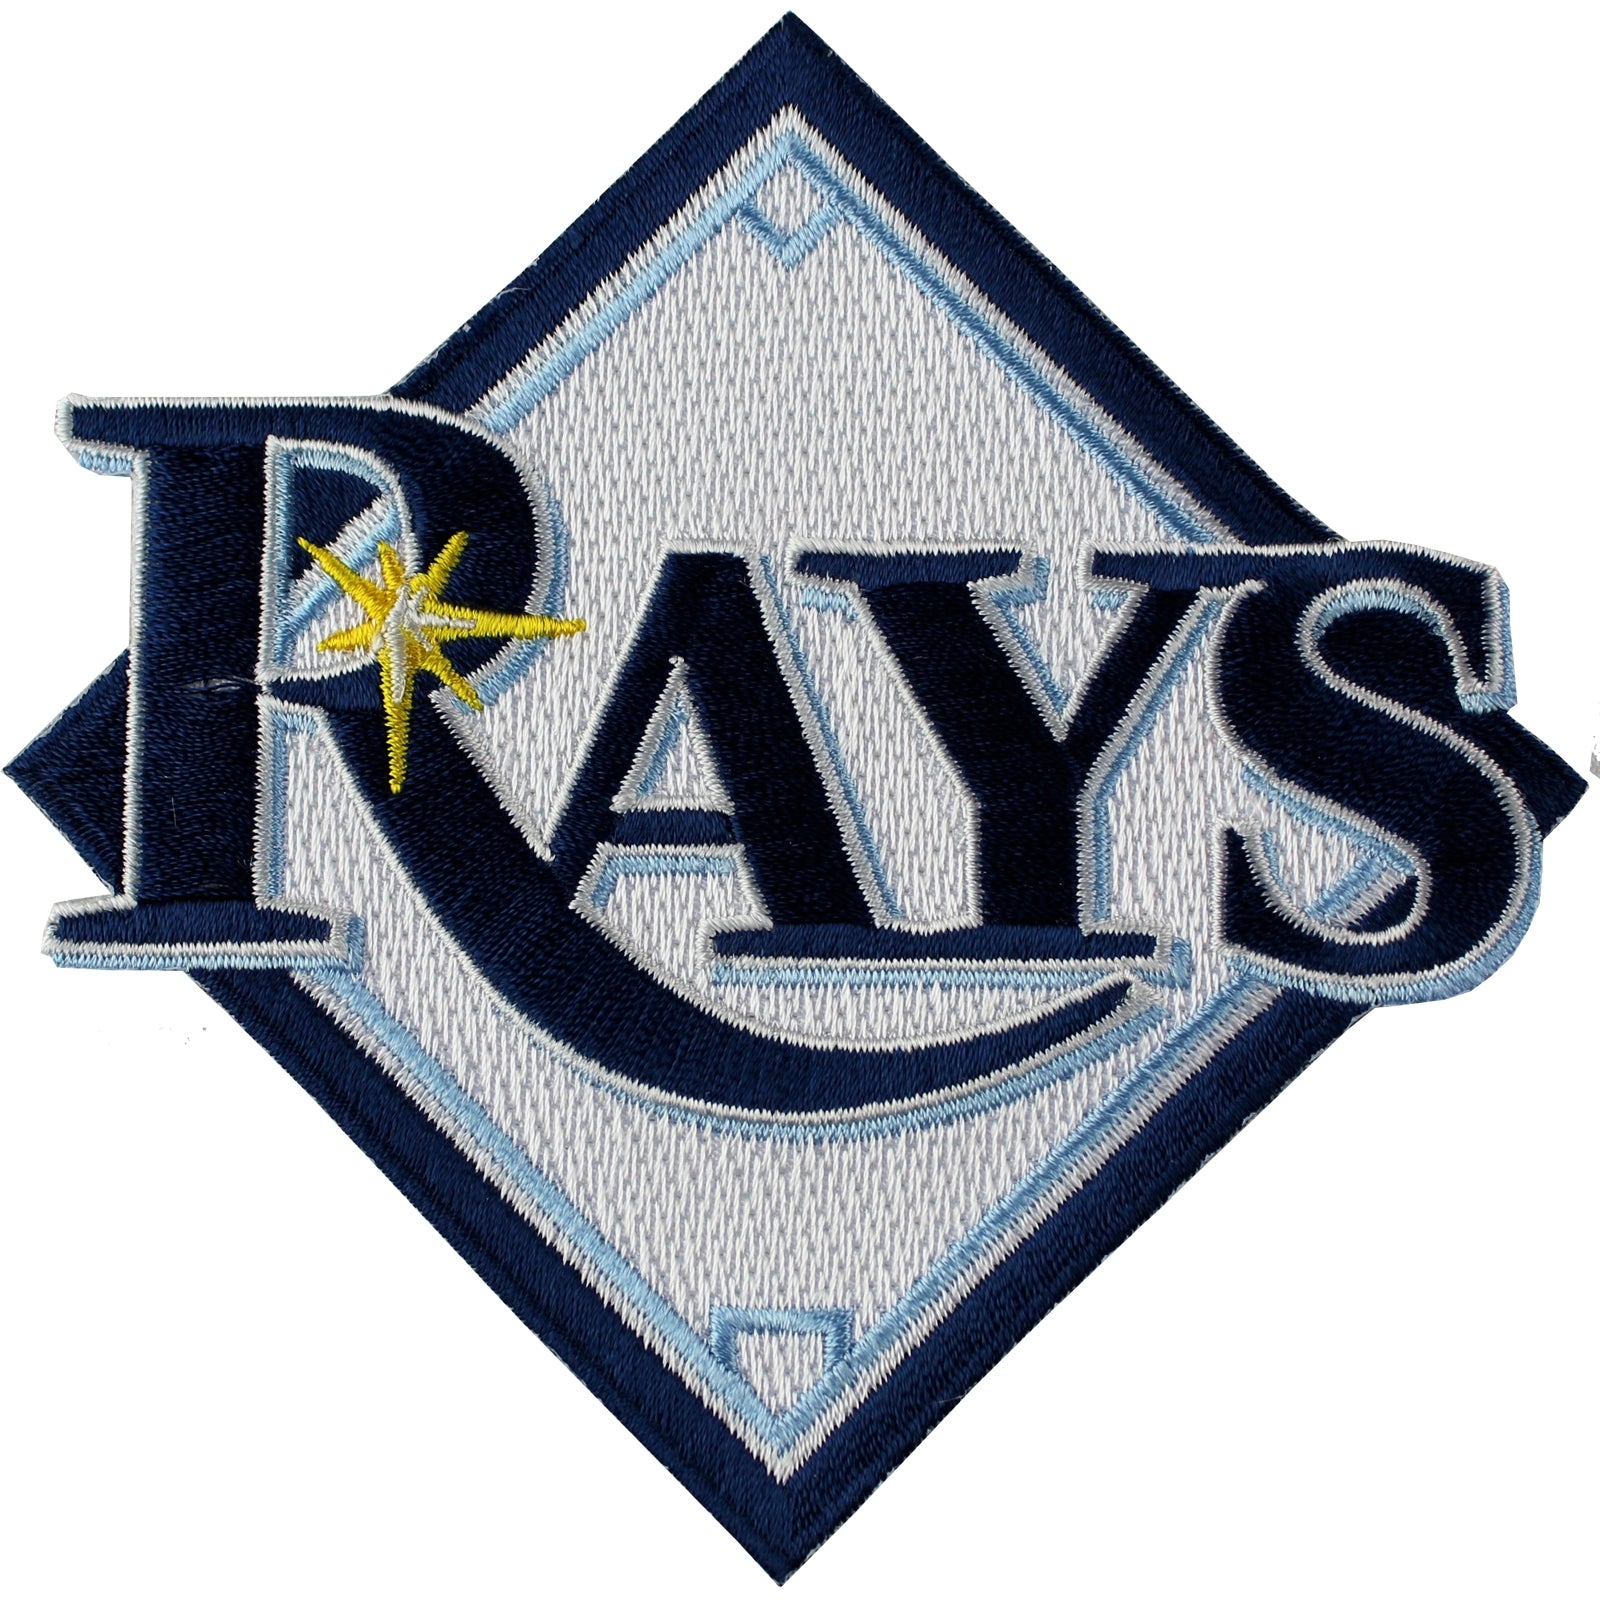 Tampa Bay Rays Primary Team Logo Patch 